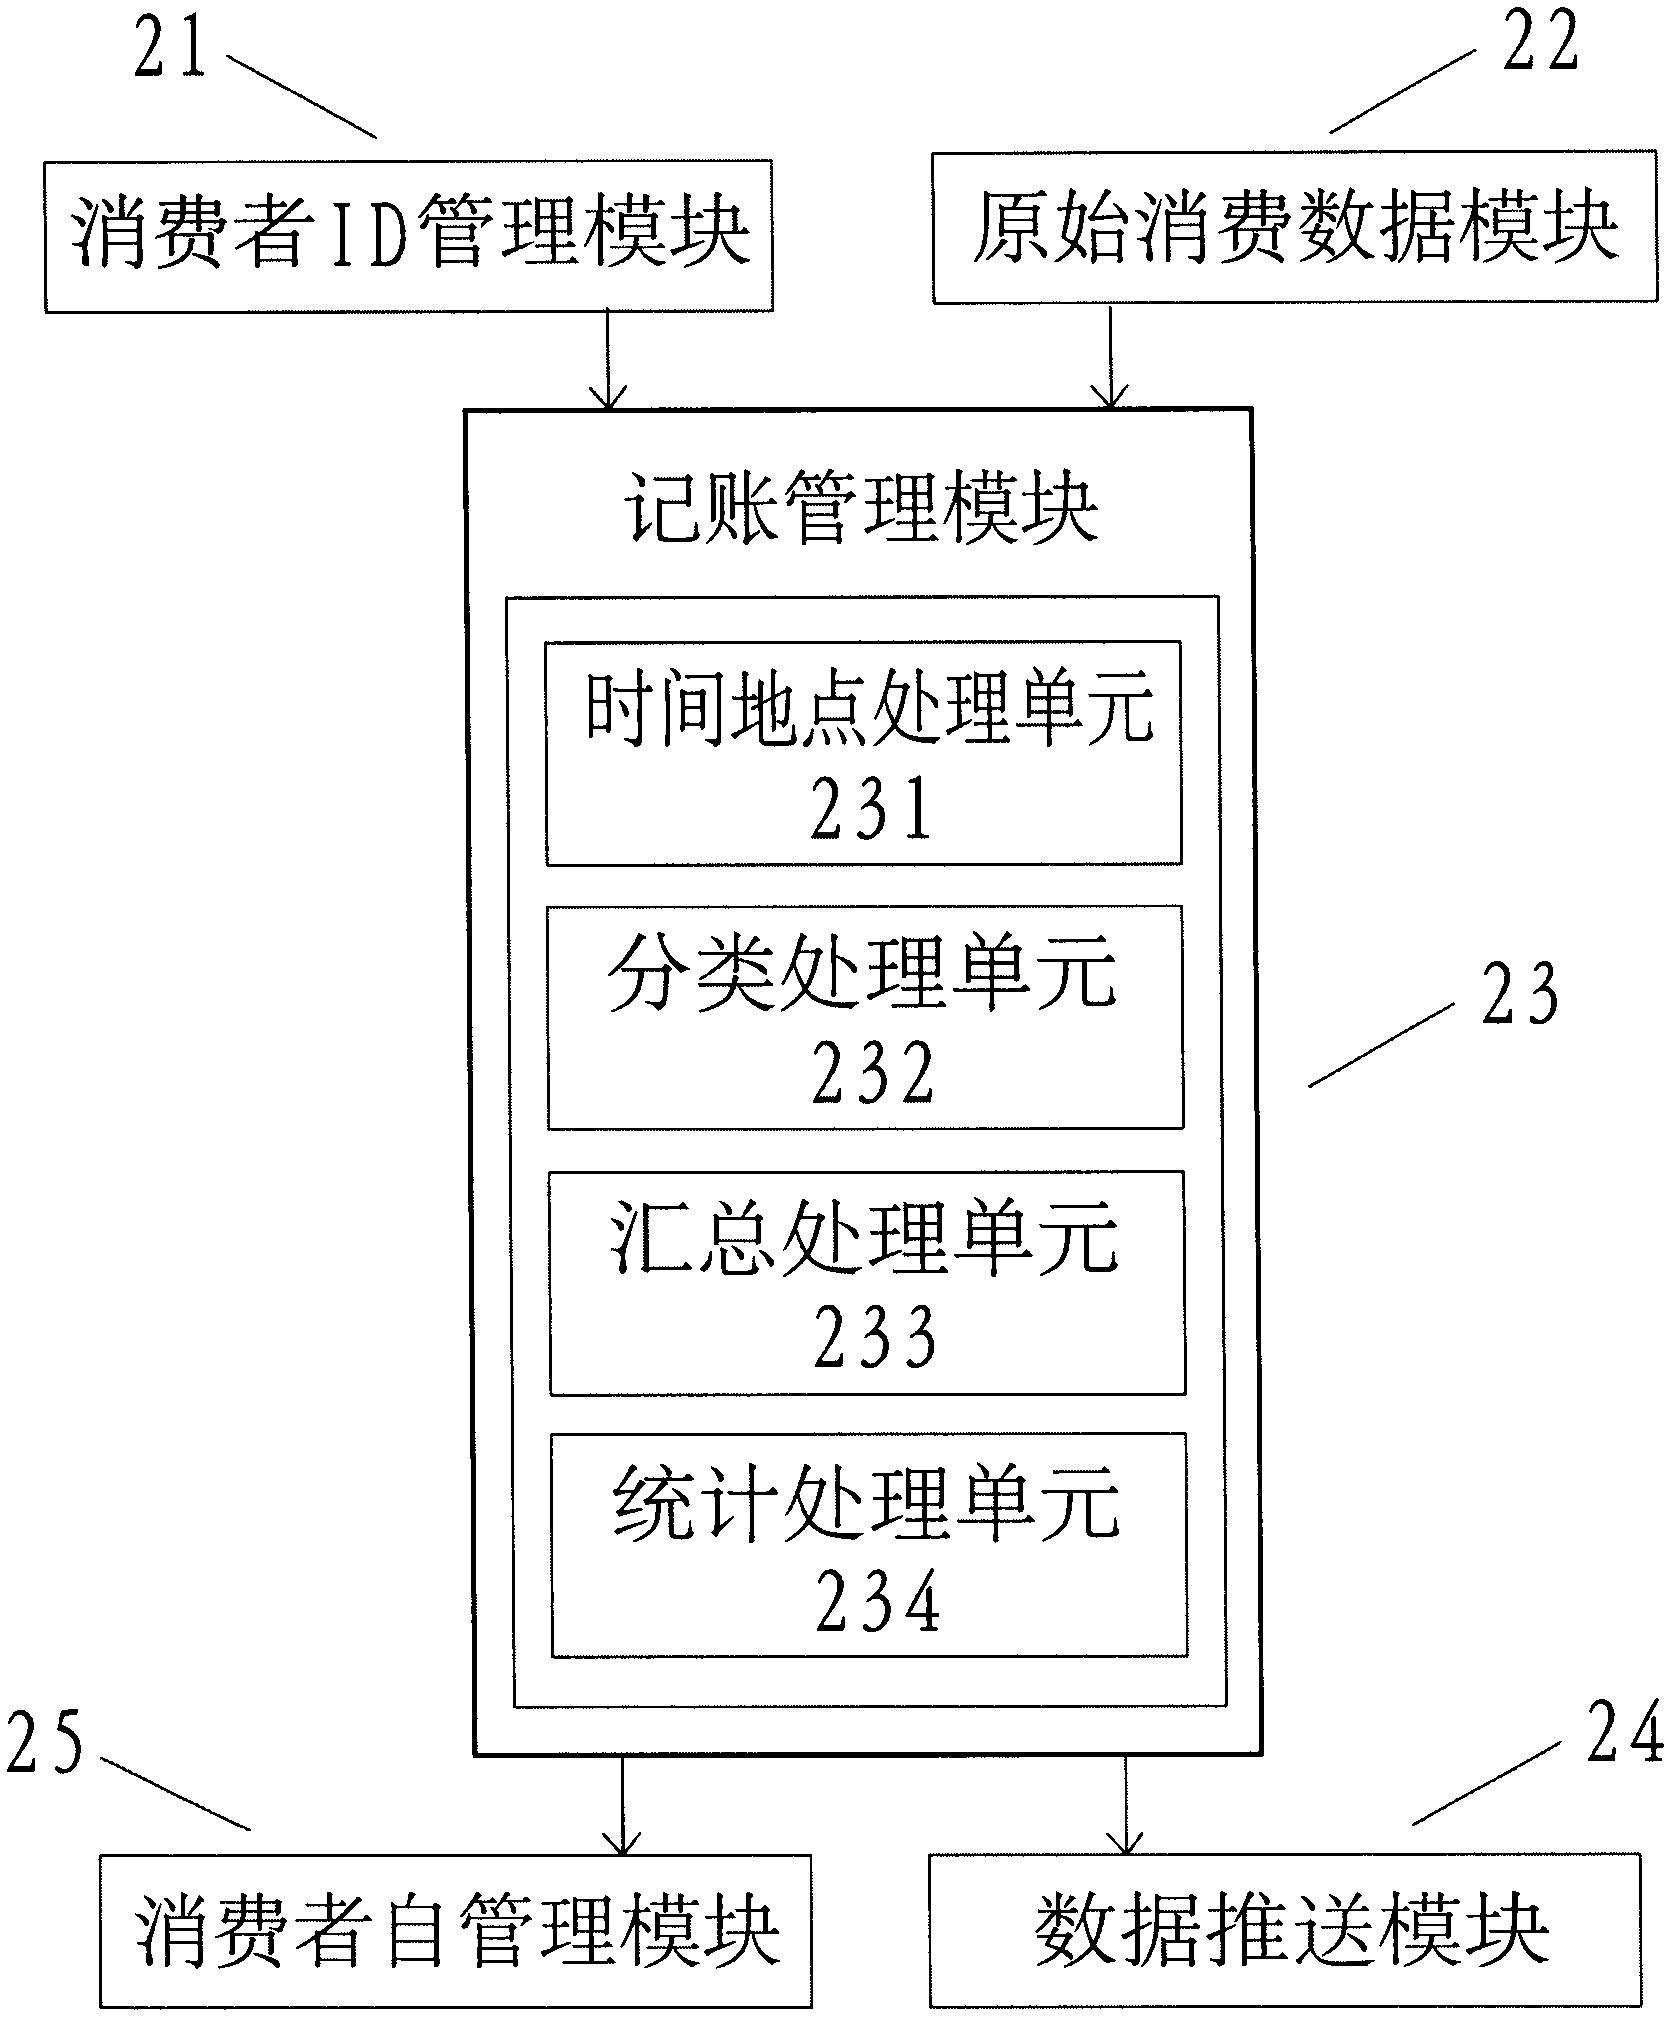 System and method for automatically accounting consumption data (records) of consumer